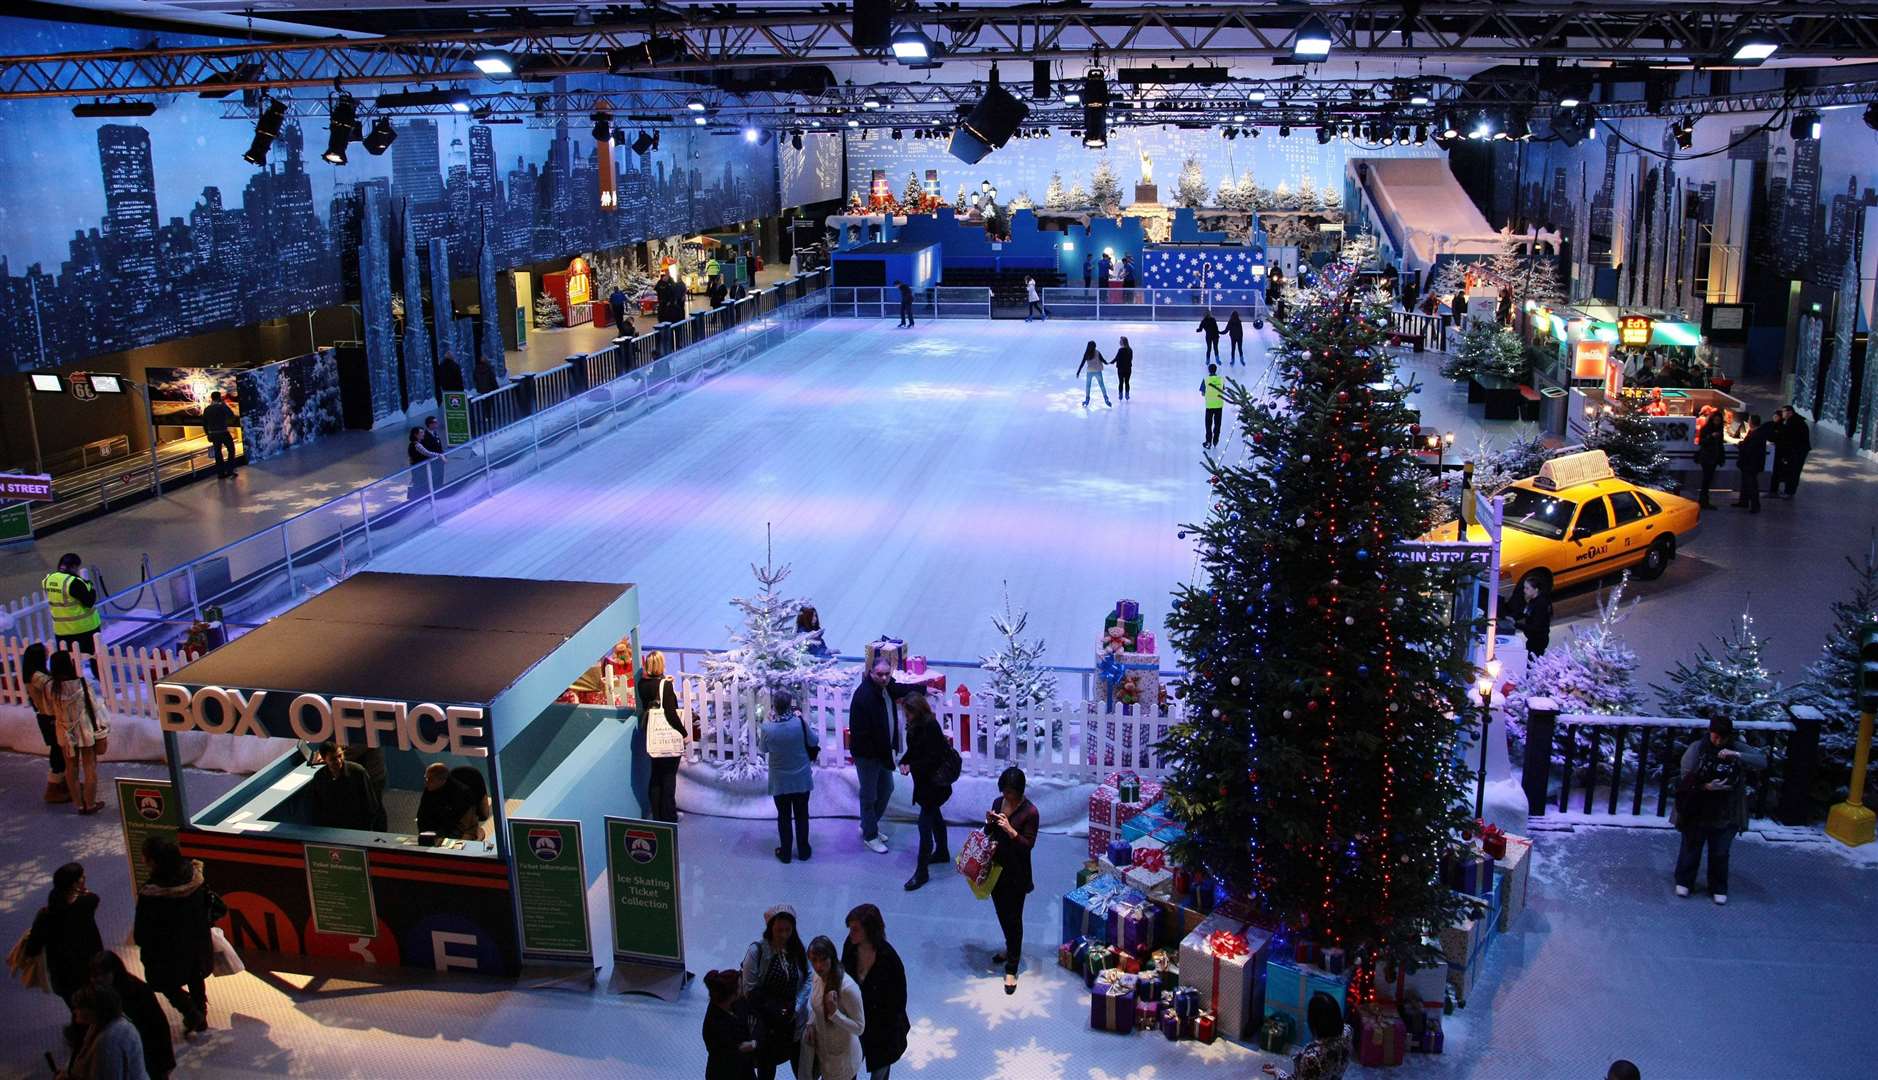 Canterbury will be getting an ice rink this Christmas. Photo credit Hugo Philpott/PA Wire (16808090)